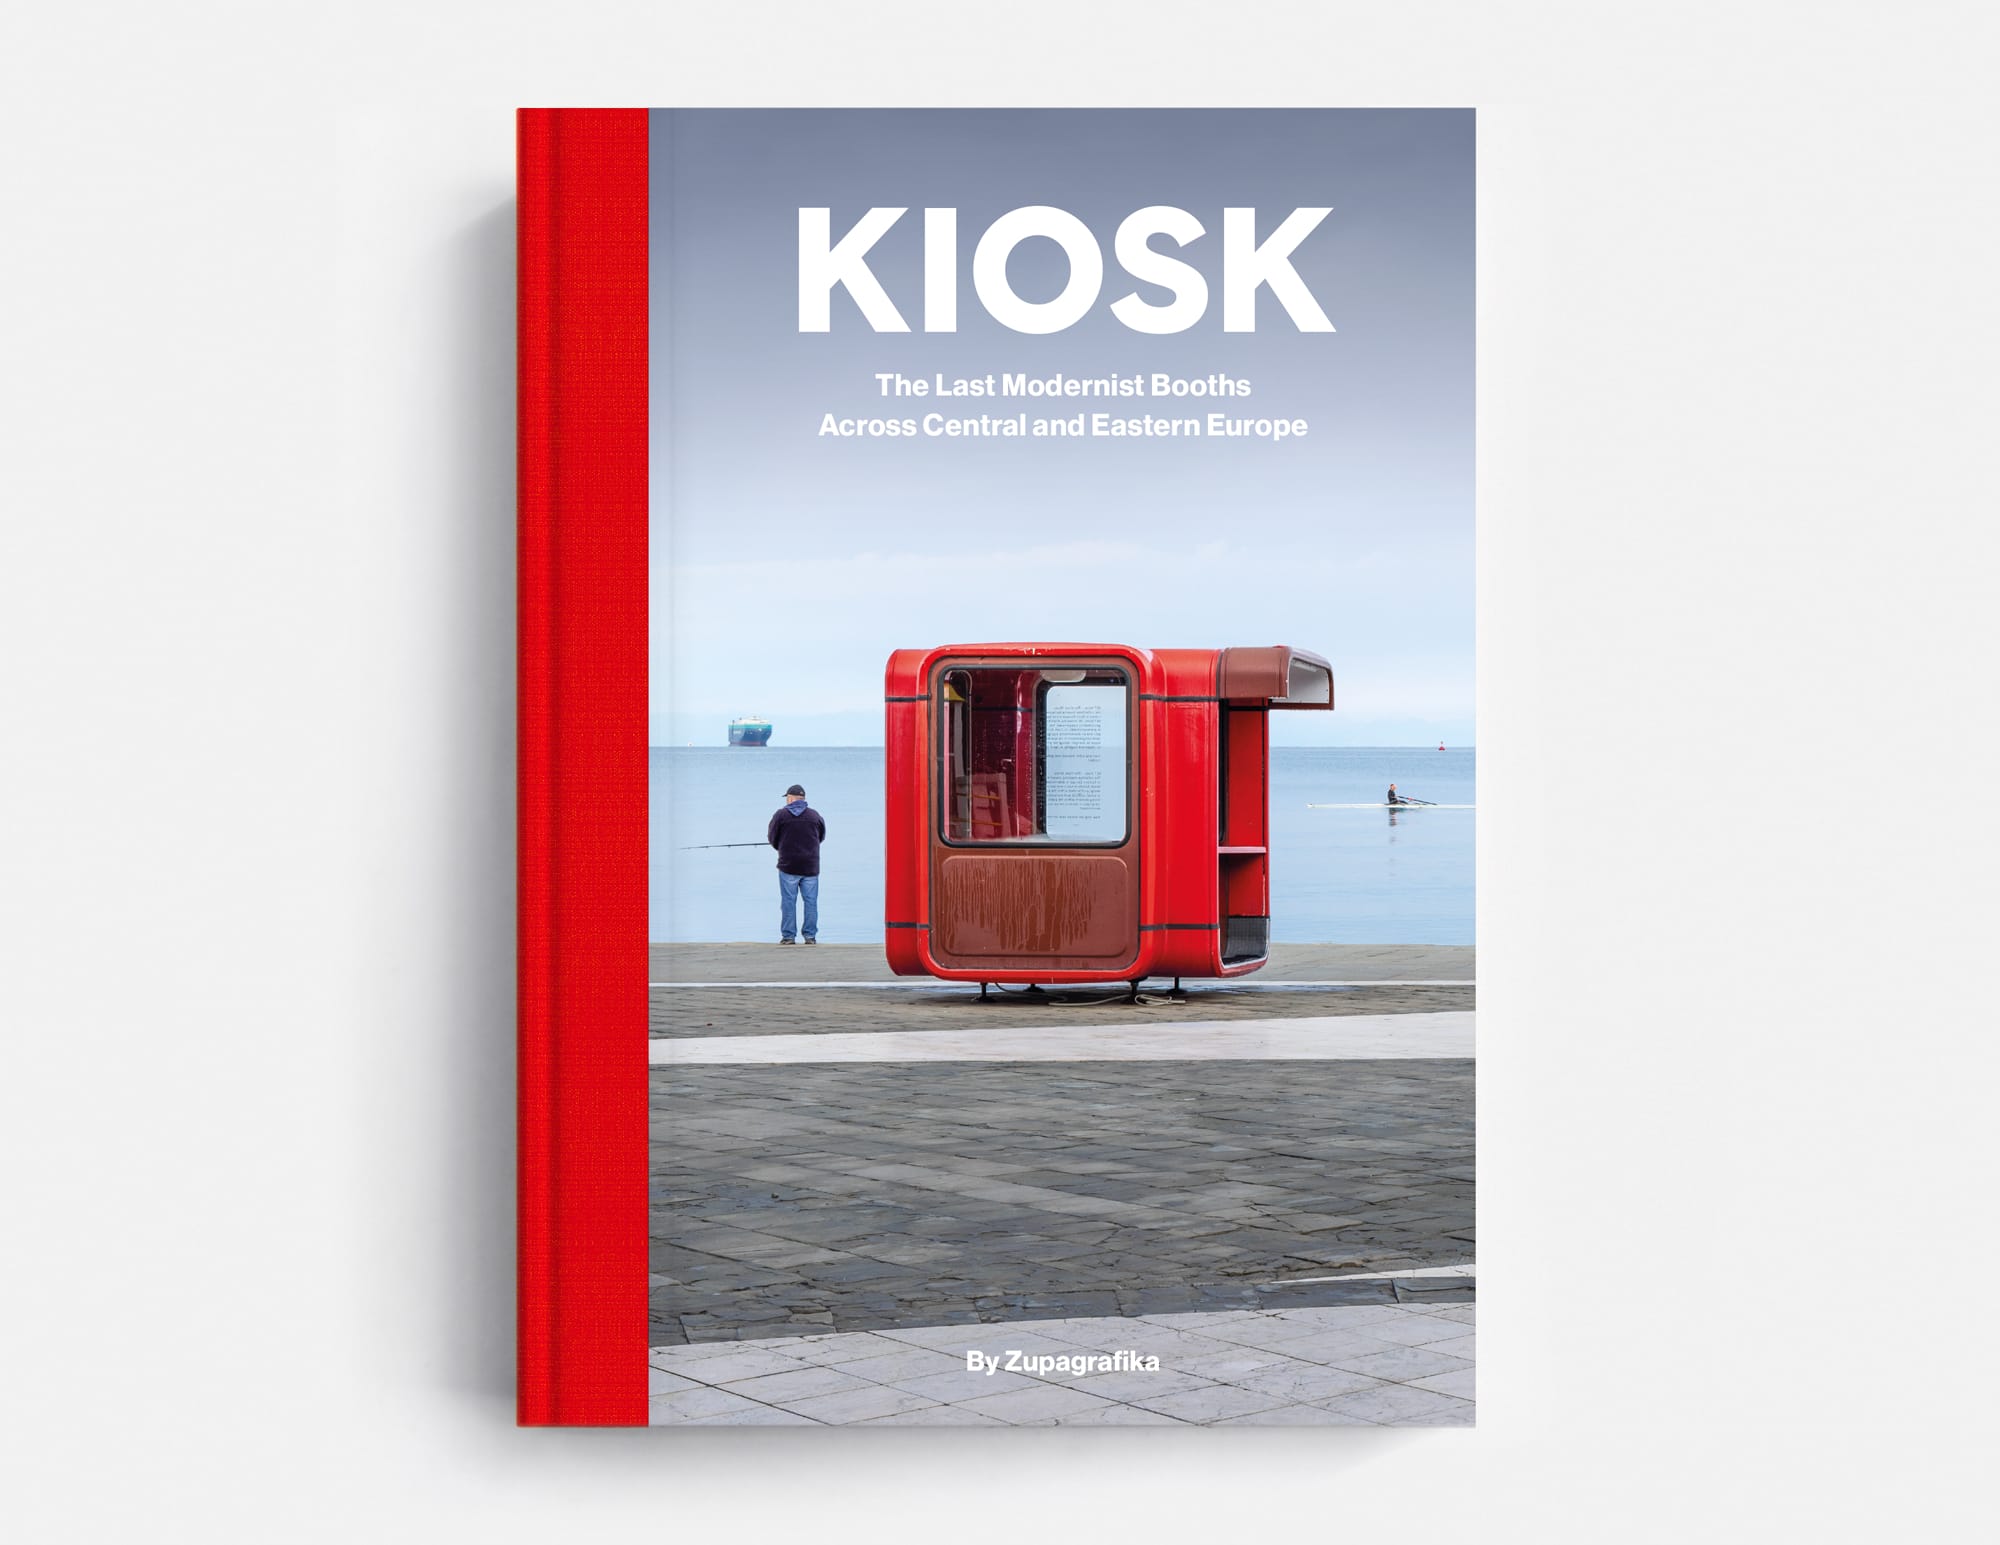 the cover of the book 'Kiosk' featuring a red spine and a photograph of a red modernist booth